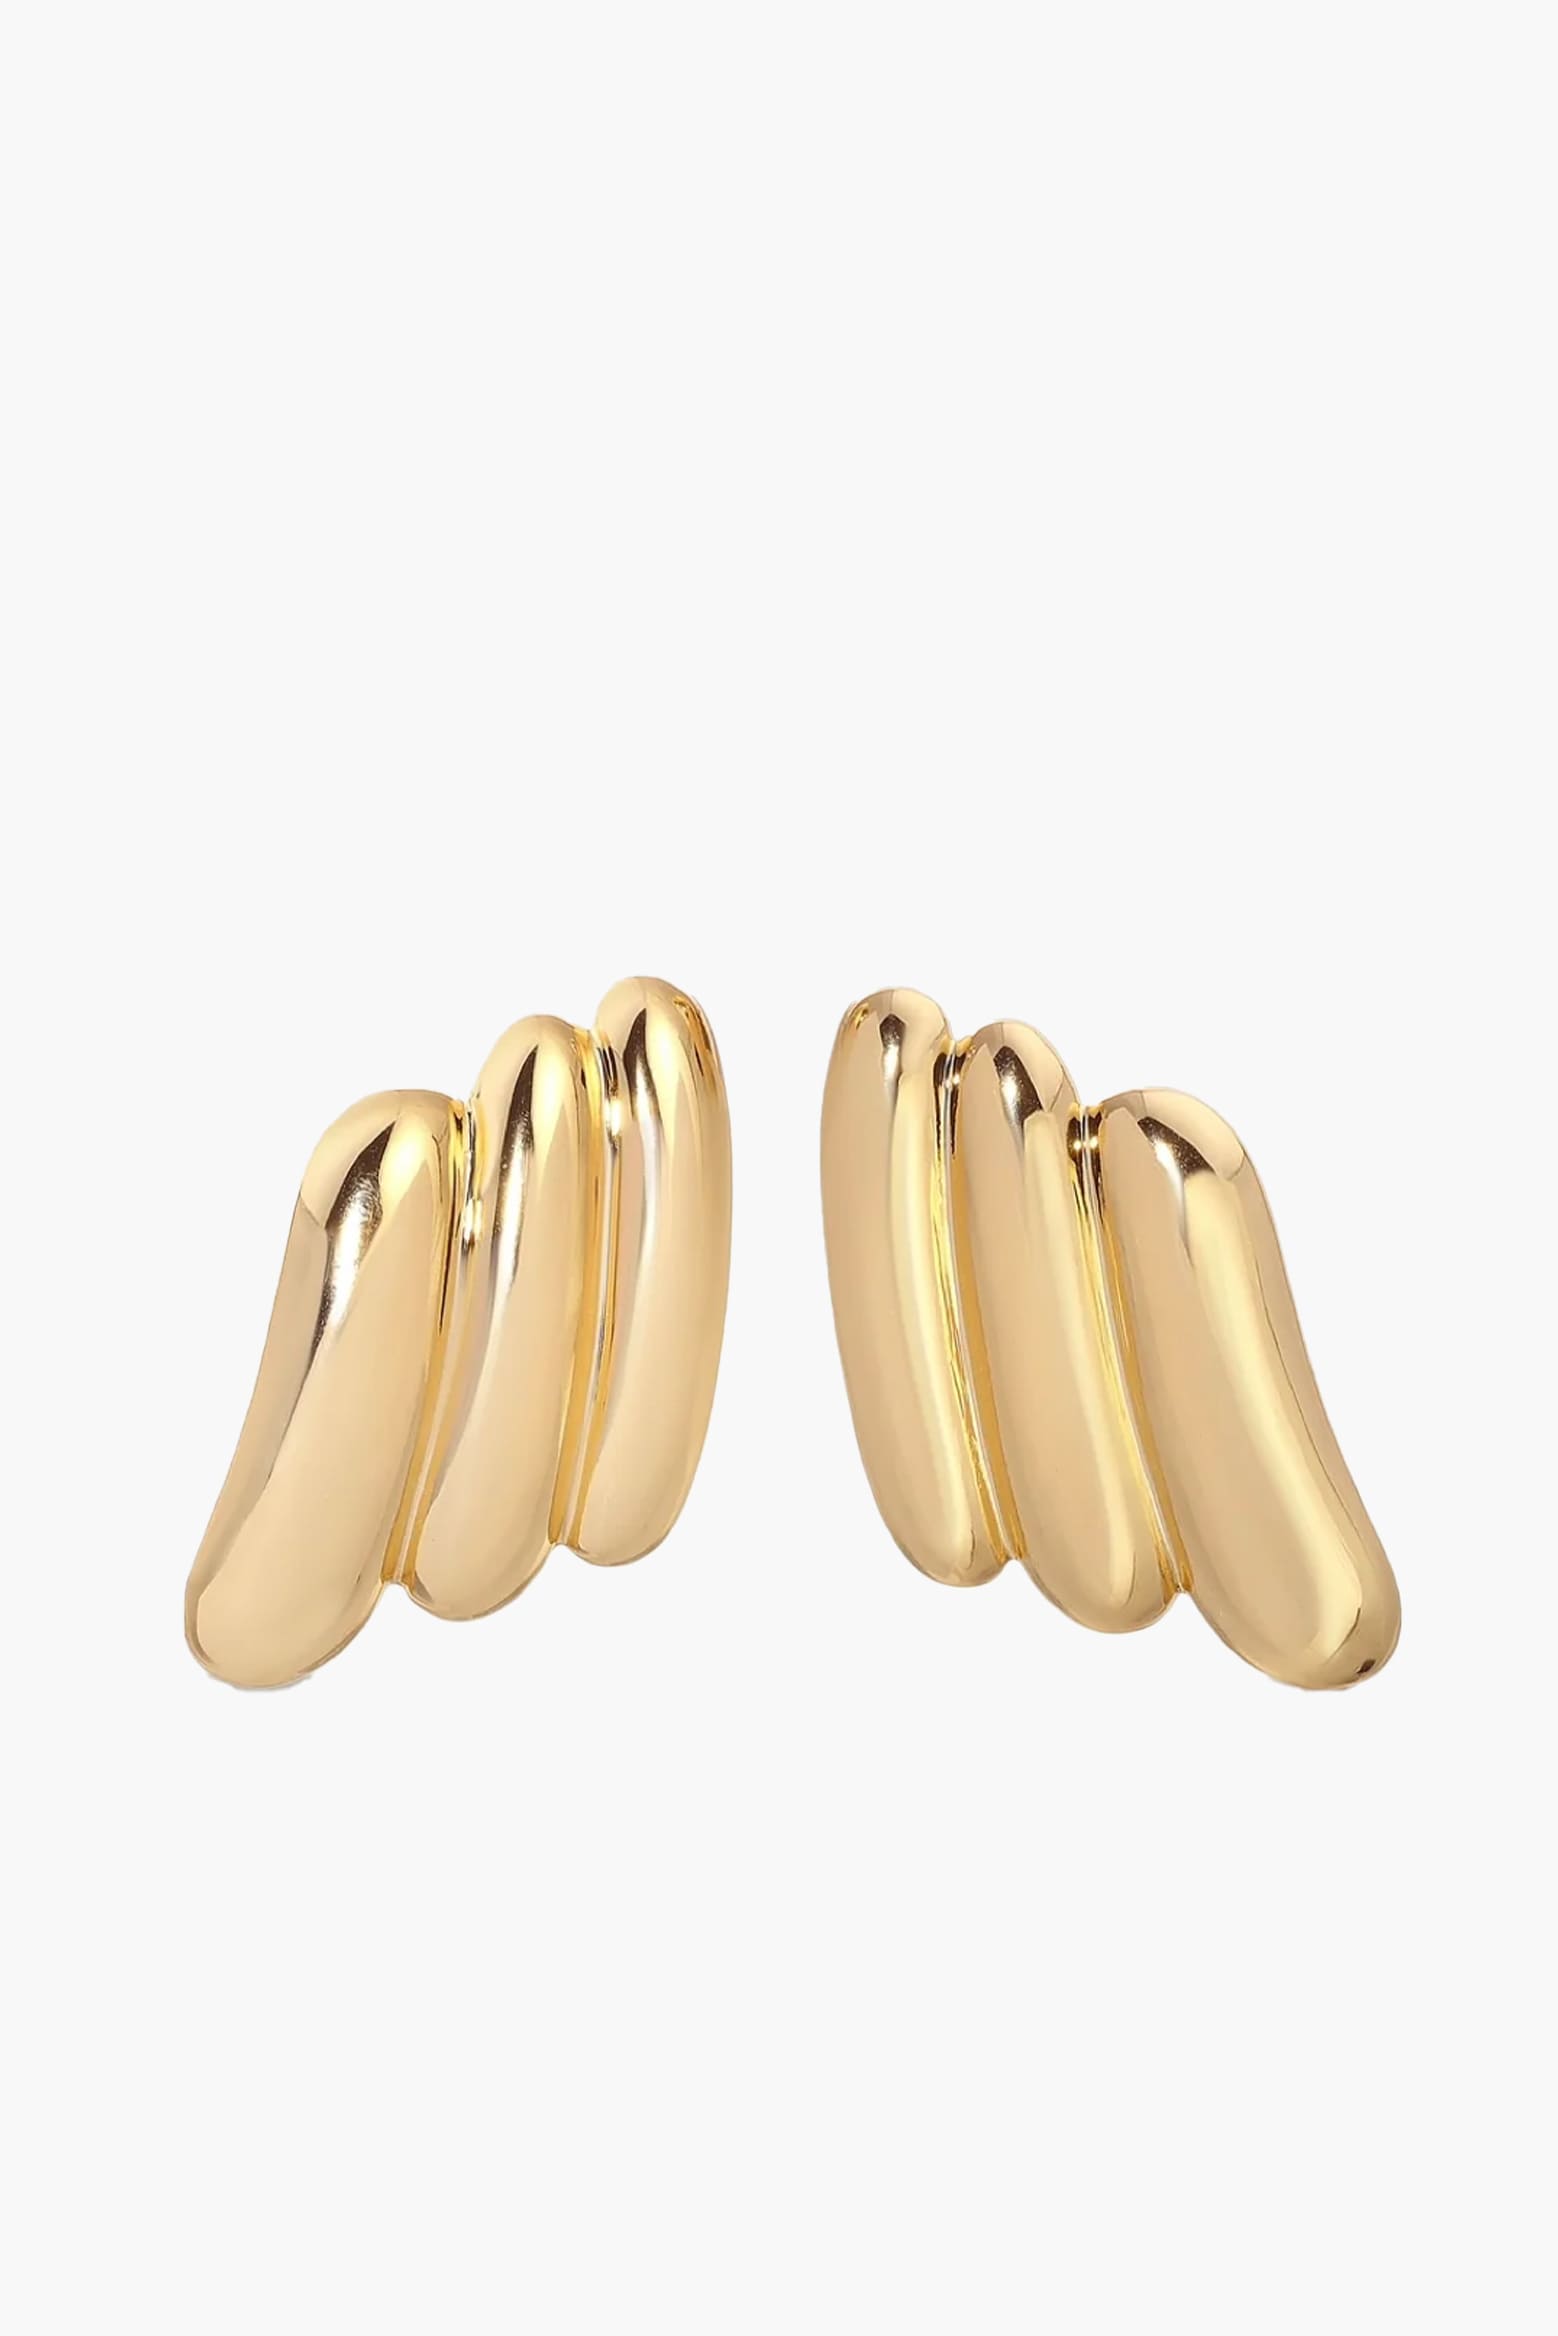 ÉCLATANT Empress Earring in Gold available at The New Trend Australia.